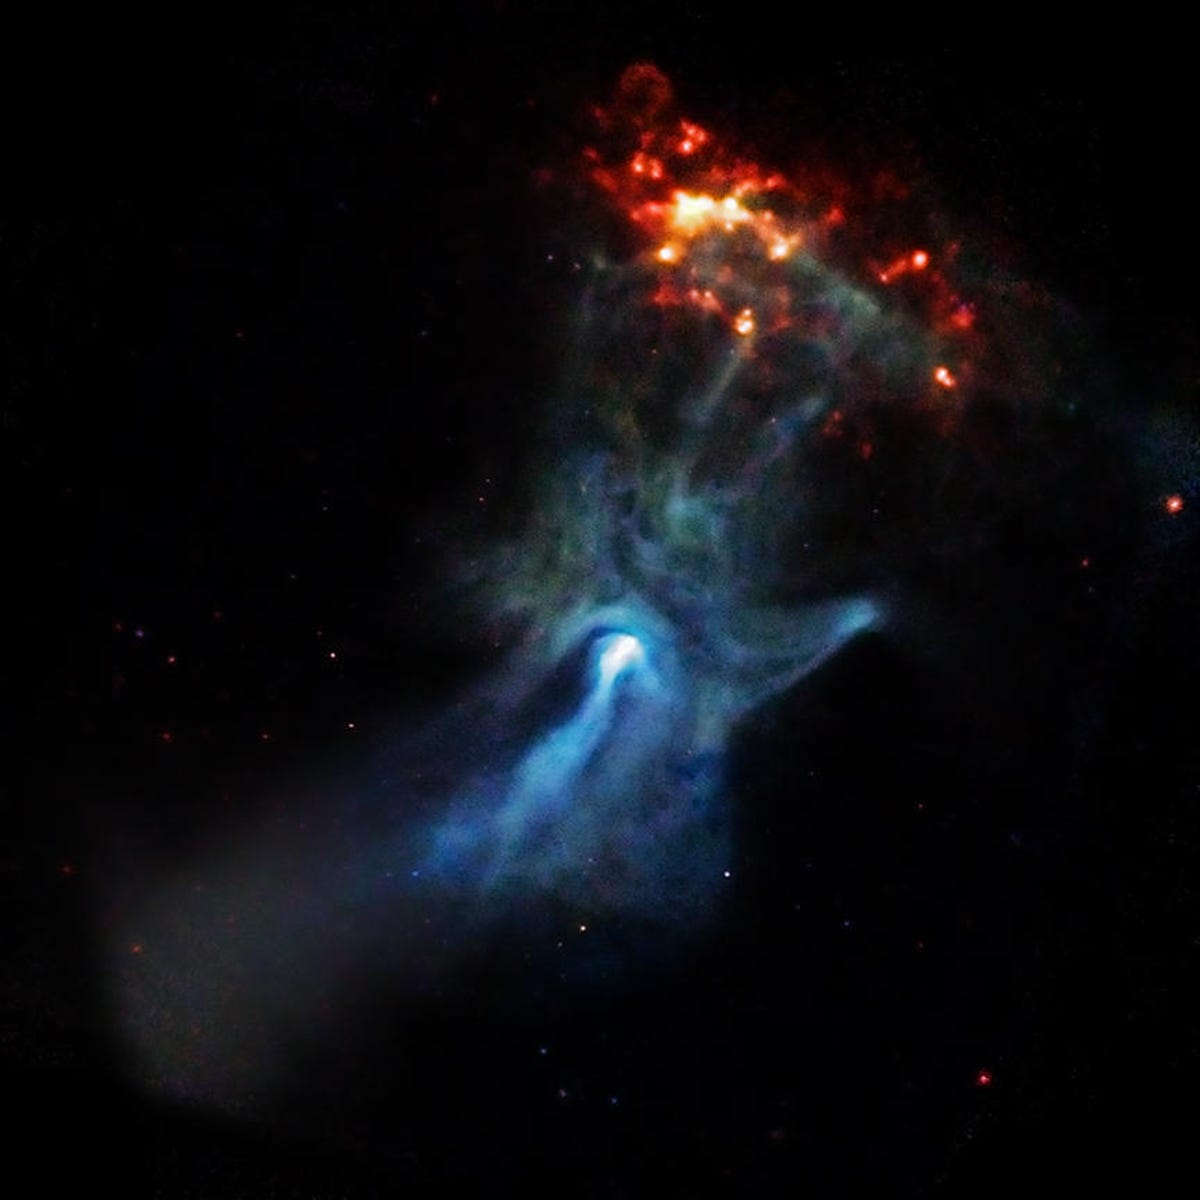 A 1700-year-old pulsar and its nebula, located about 17,000 light years from Earth.